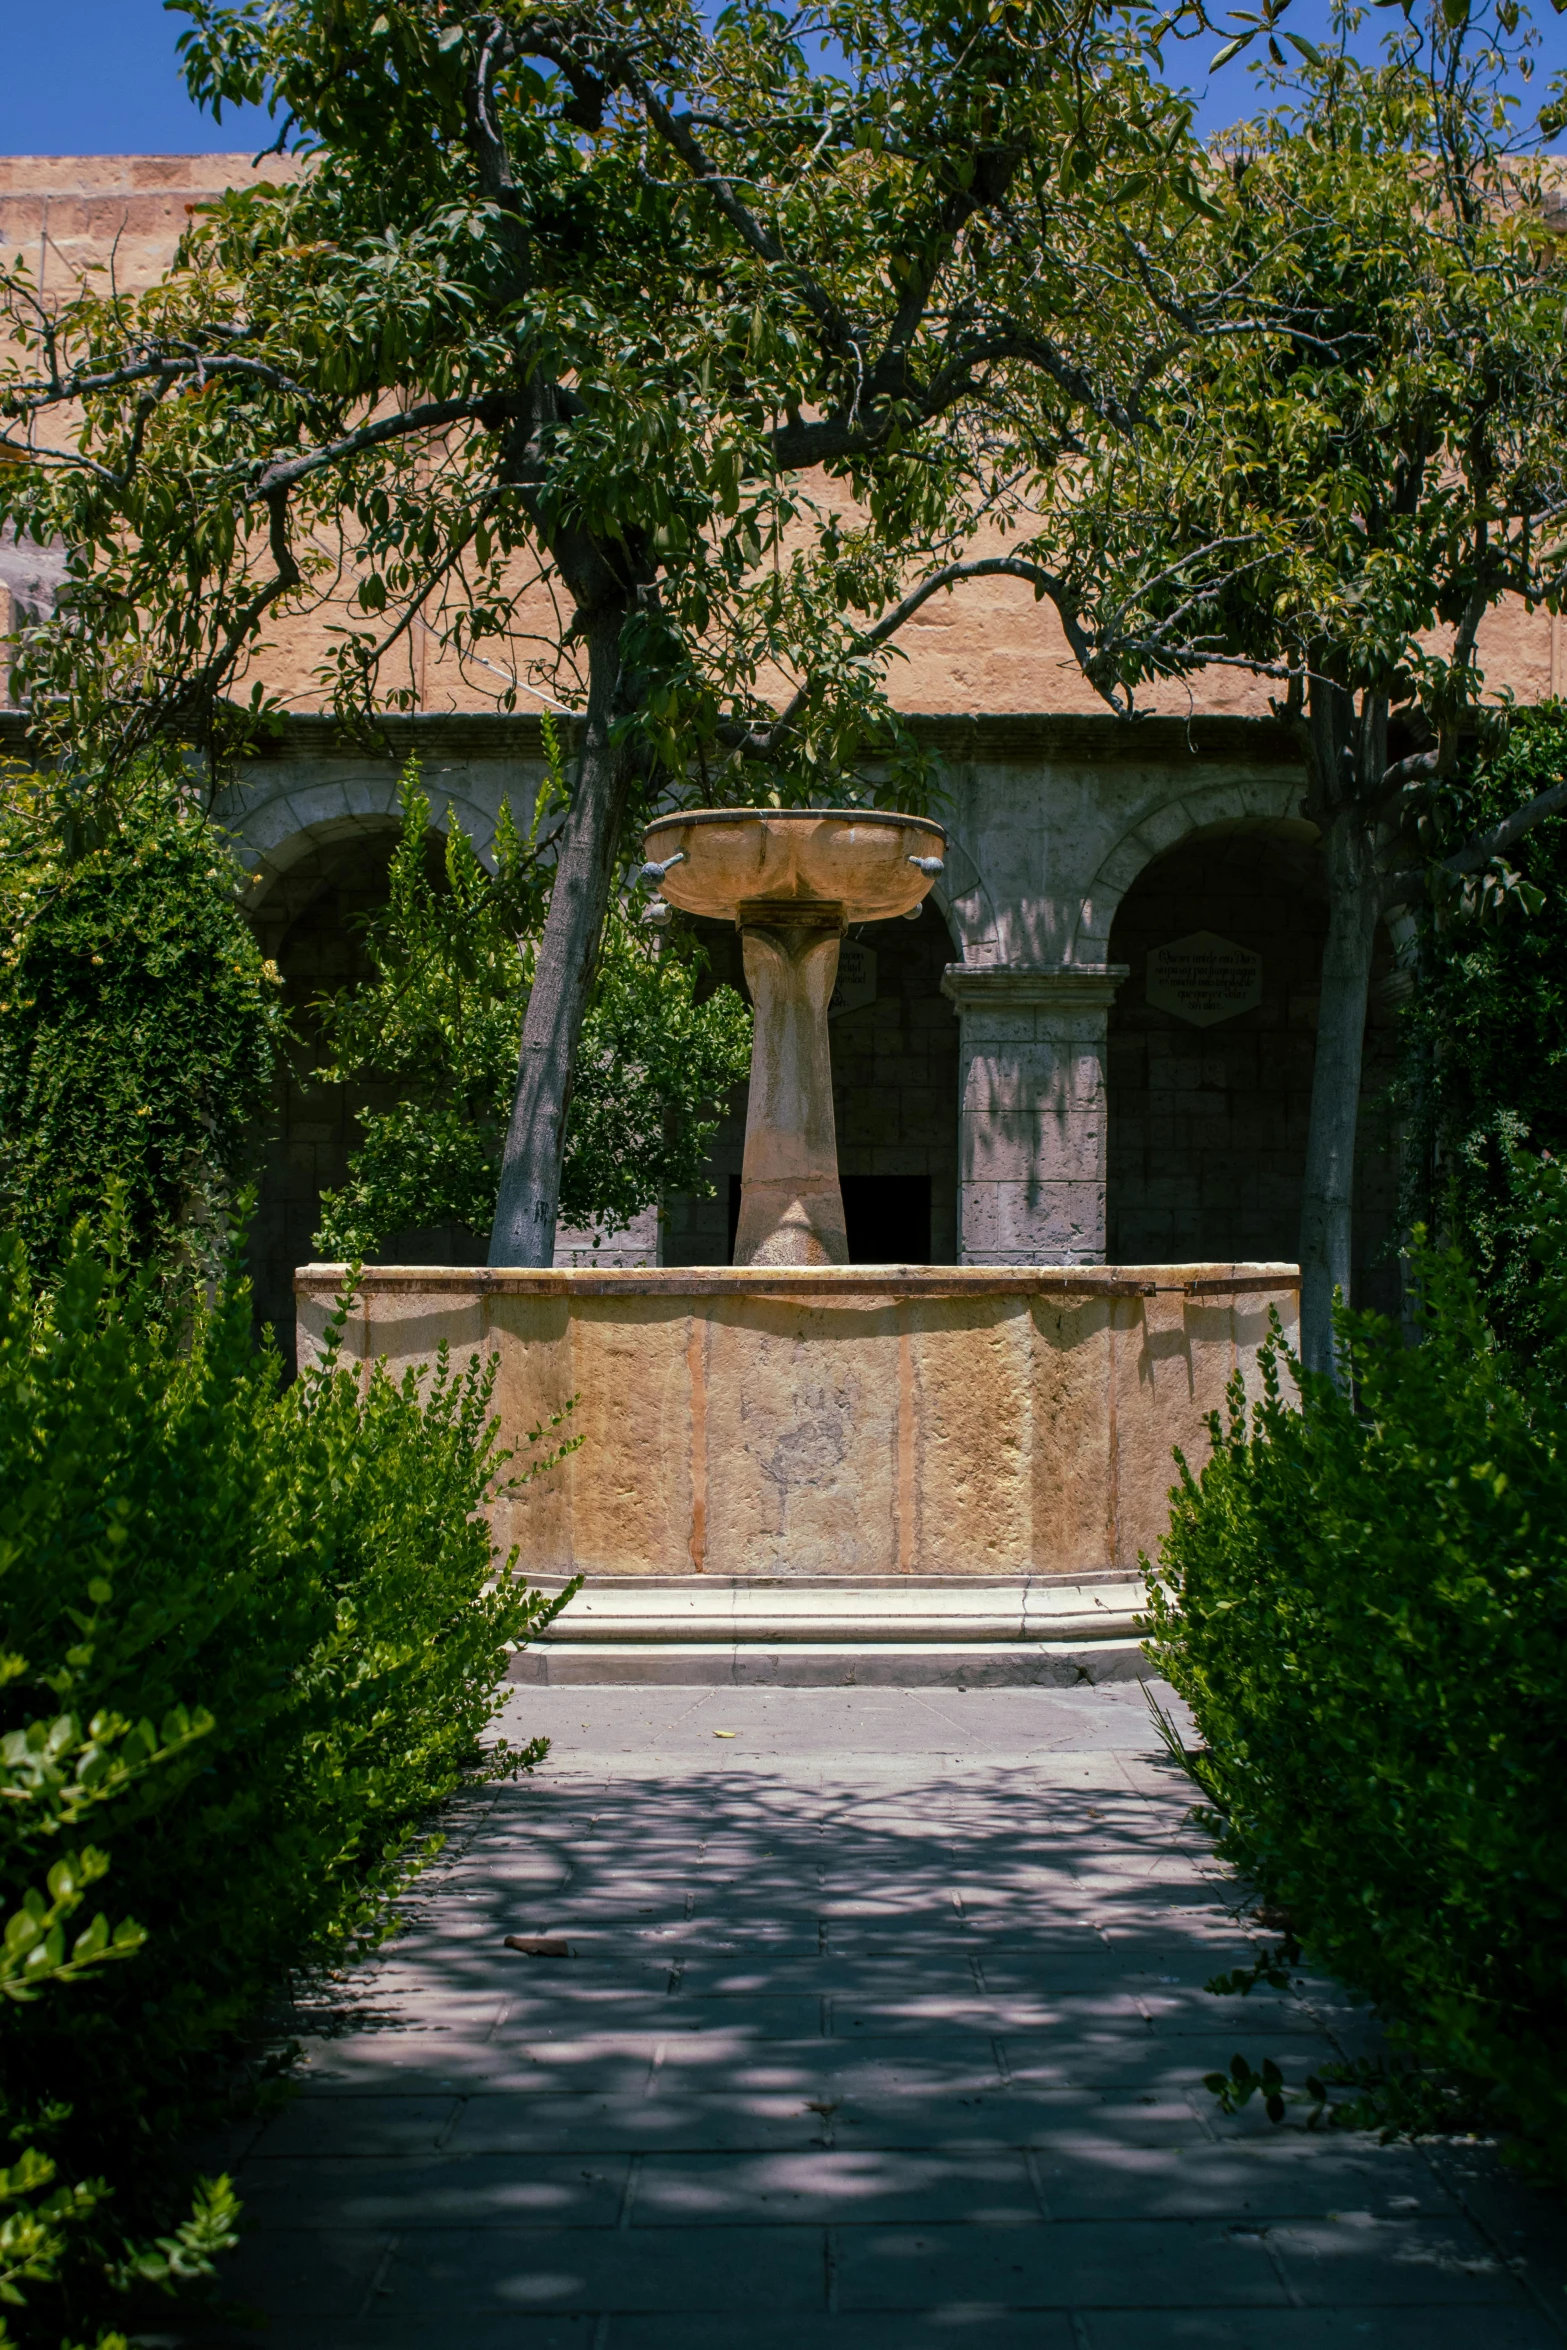 the fountain has many trees and shrubs around it